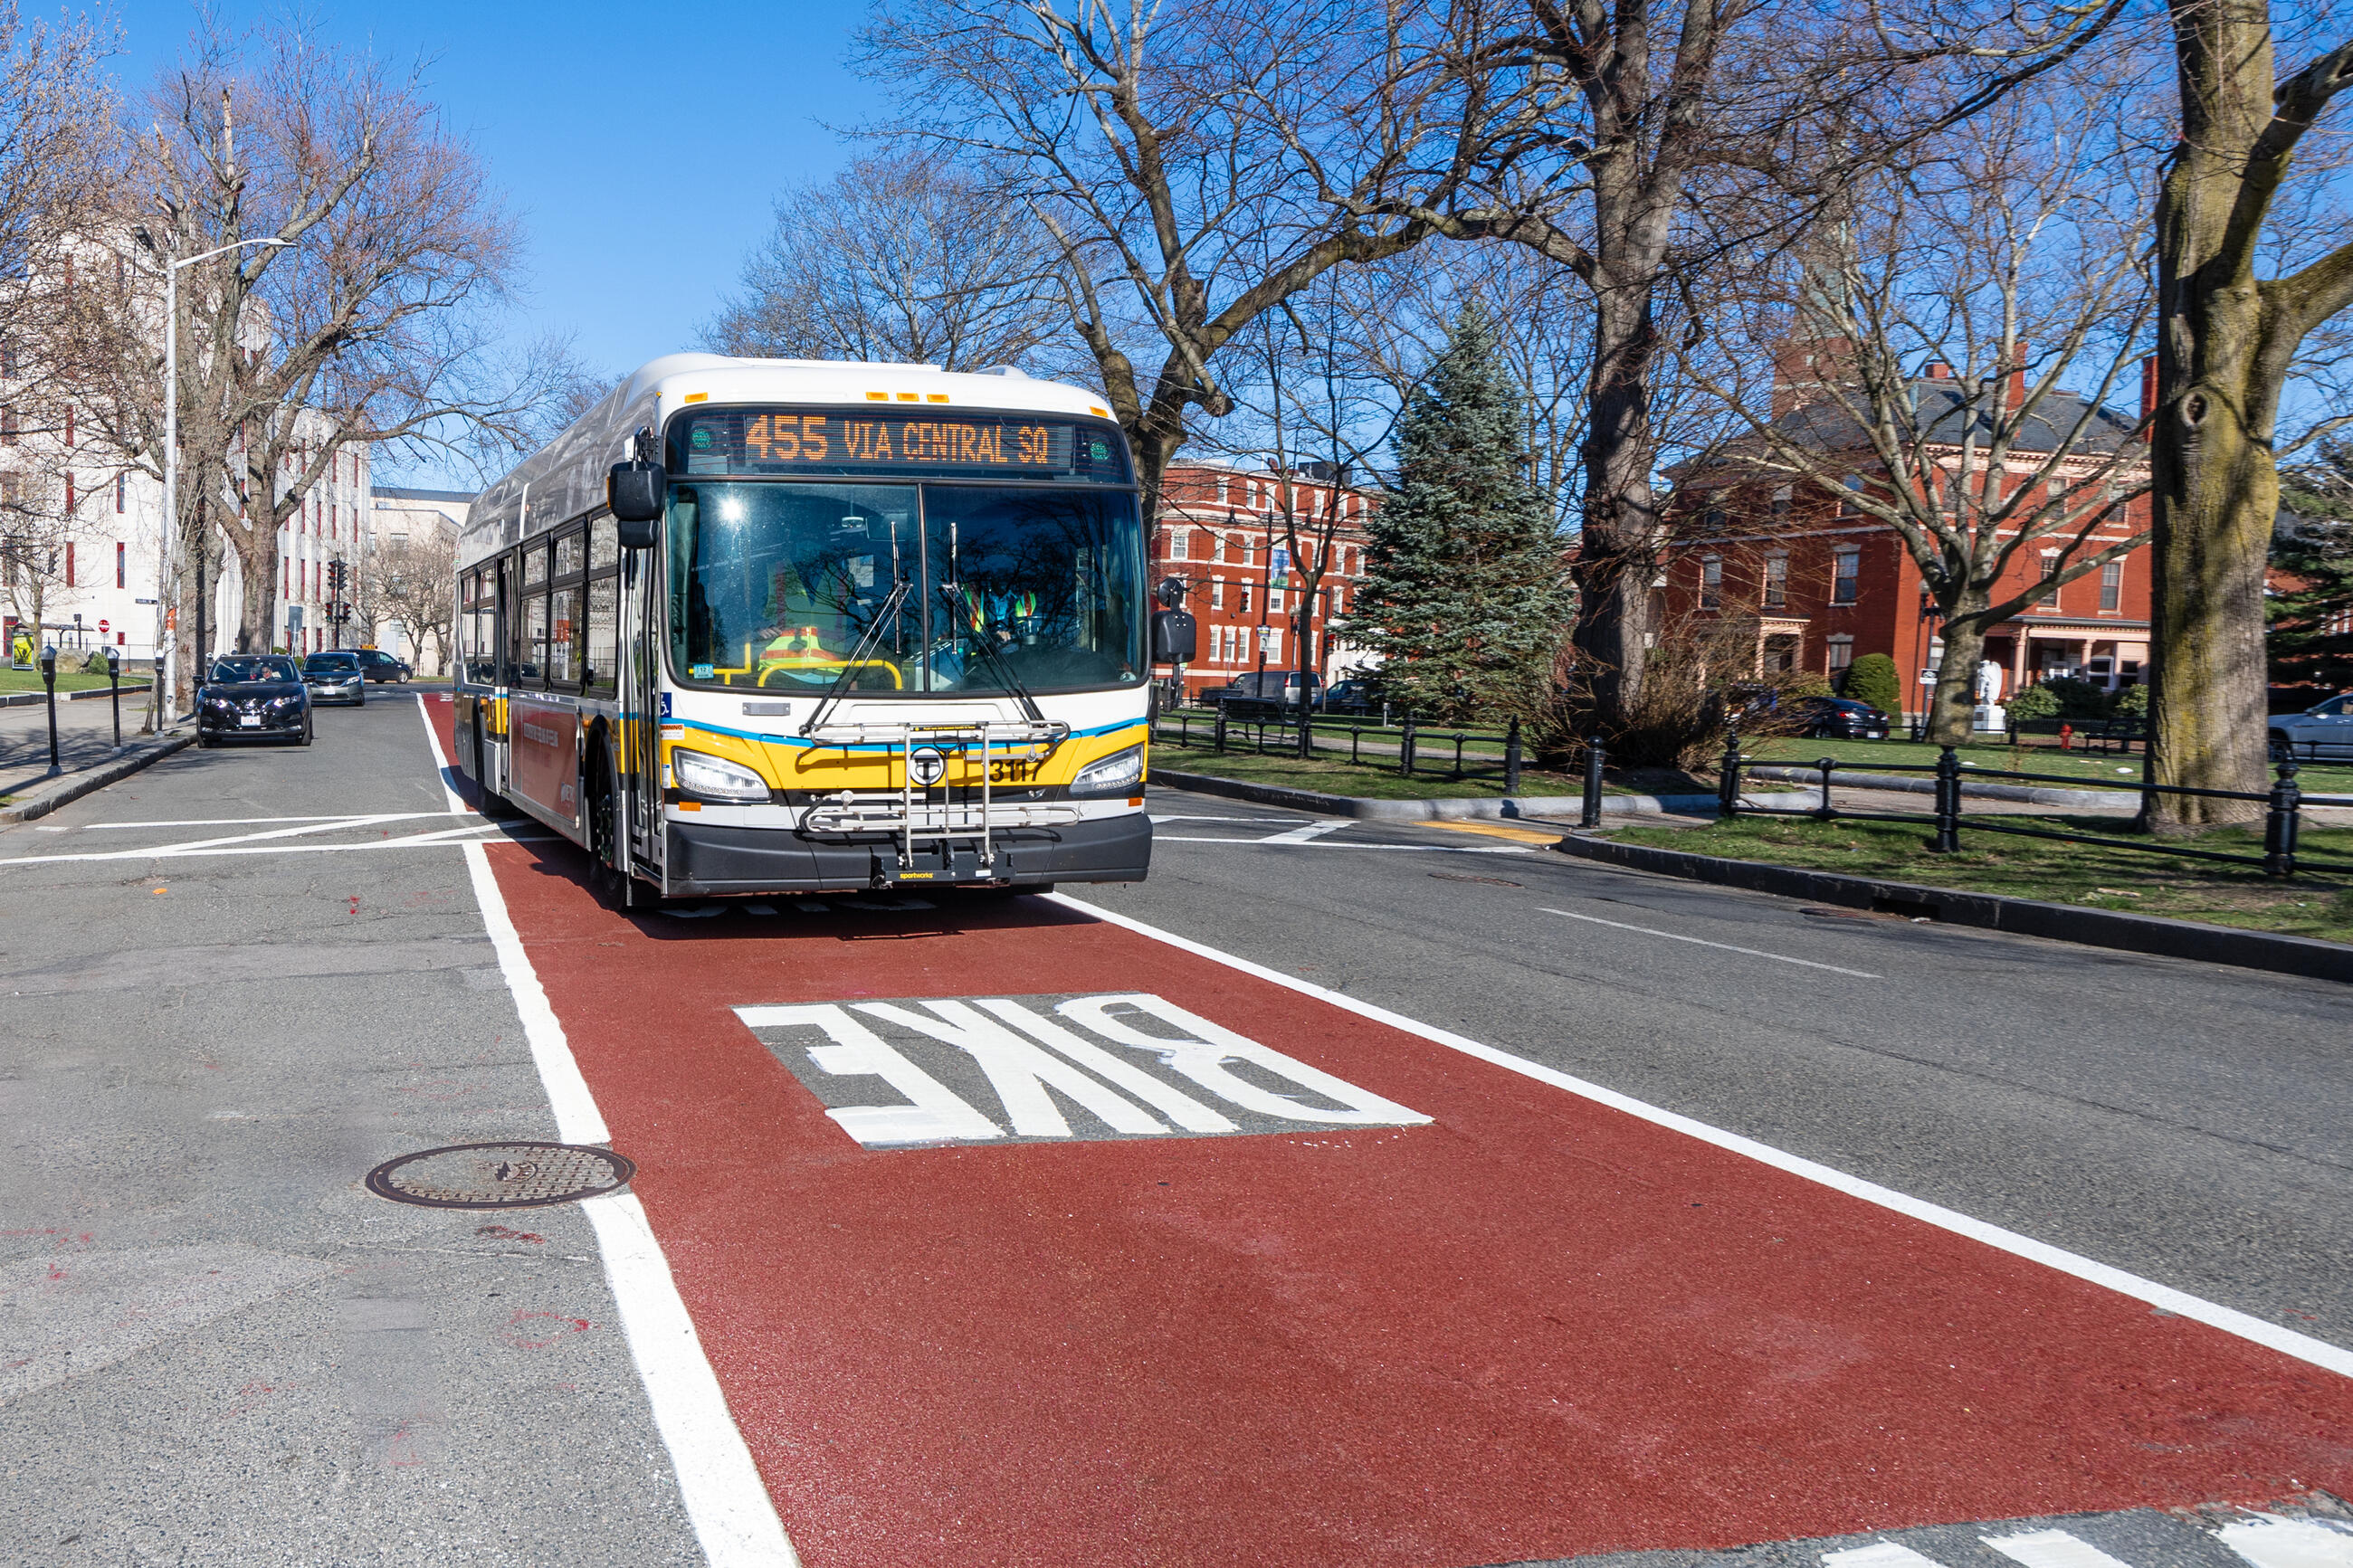 Route 455 bus using the new shared bus-bike lane on North Common St near the Lynn Public Library on April 8, 2021.